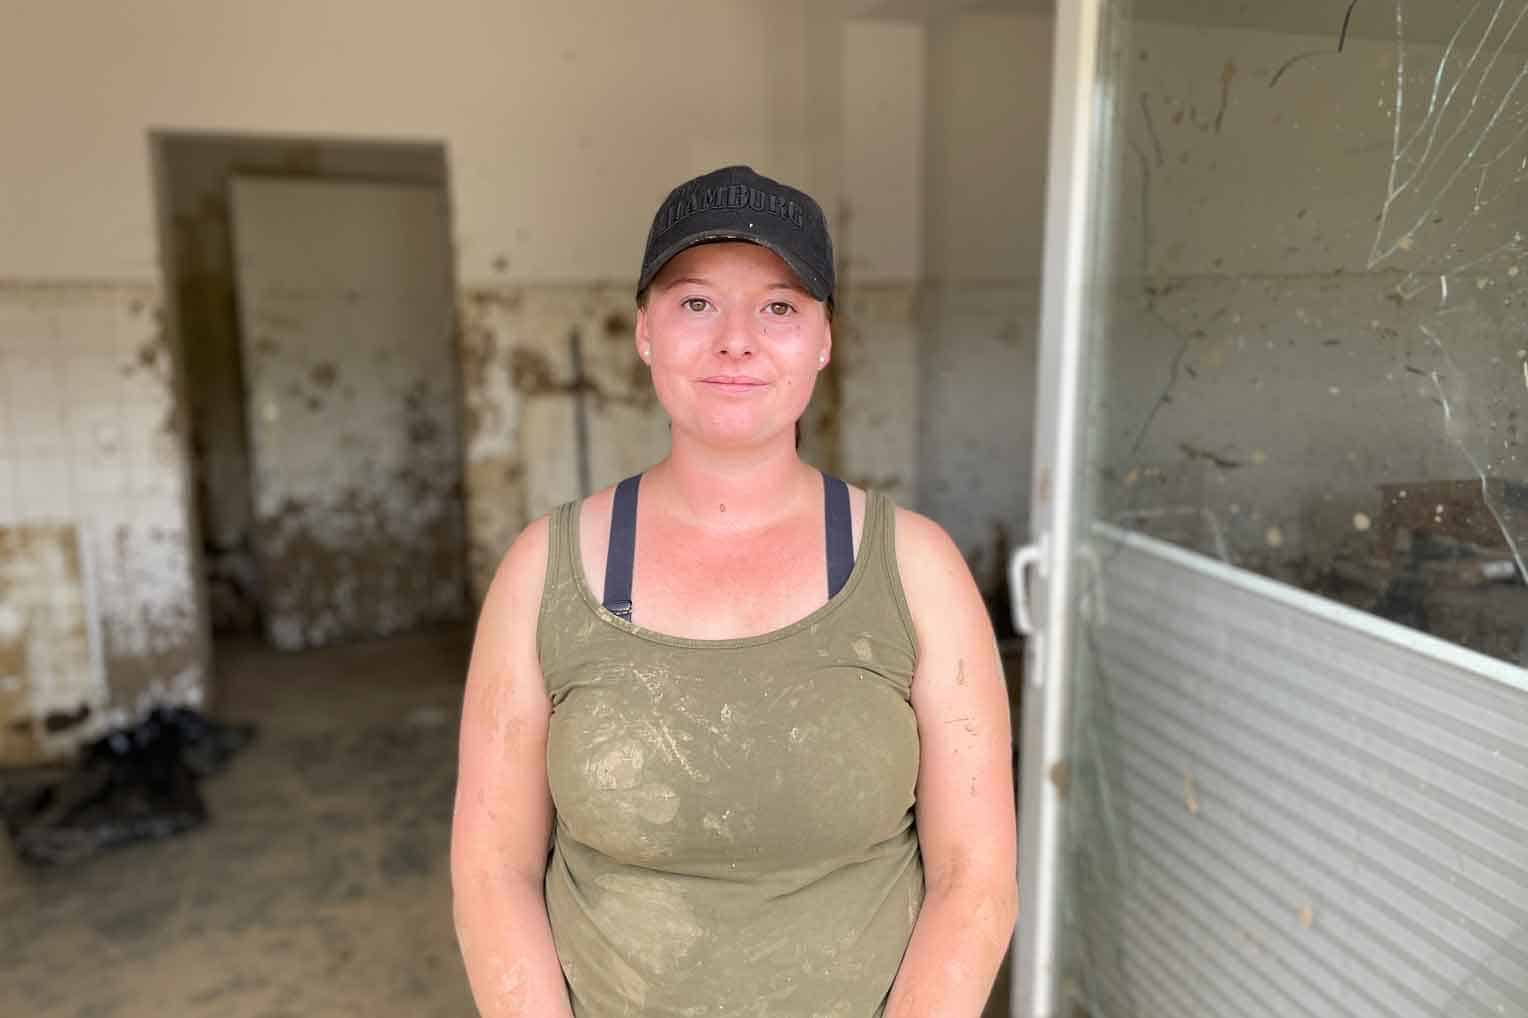 Victoria’s dream apartment is ruined but she plans to rebuild thanks, in part, to the assistance of Samaritan’s Purse.